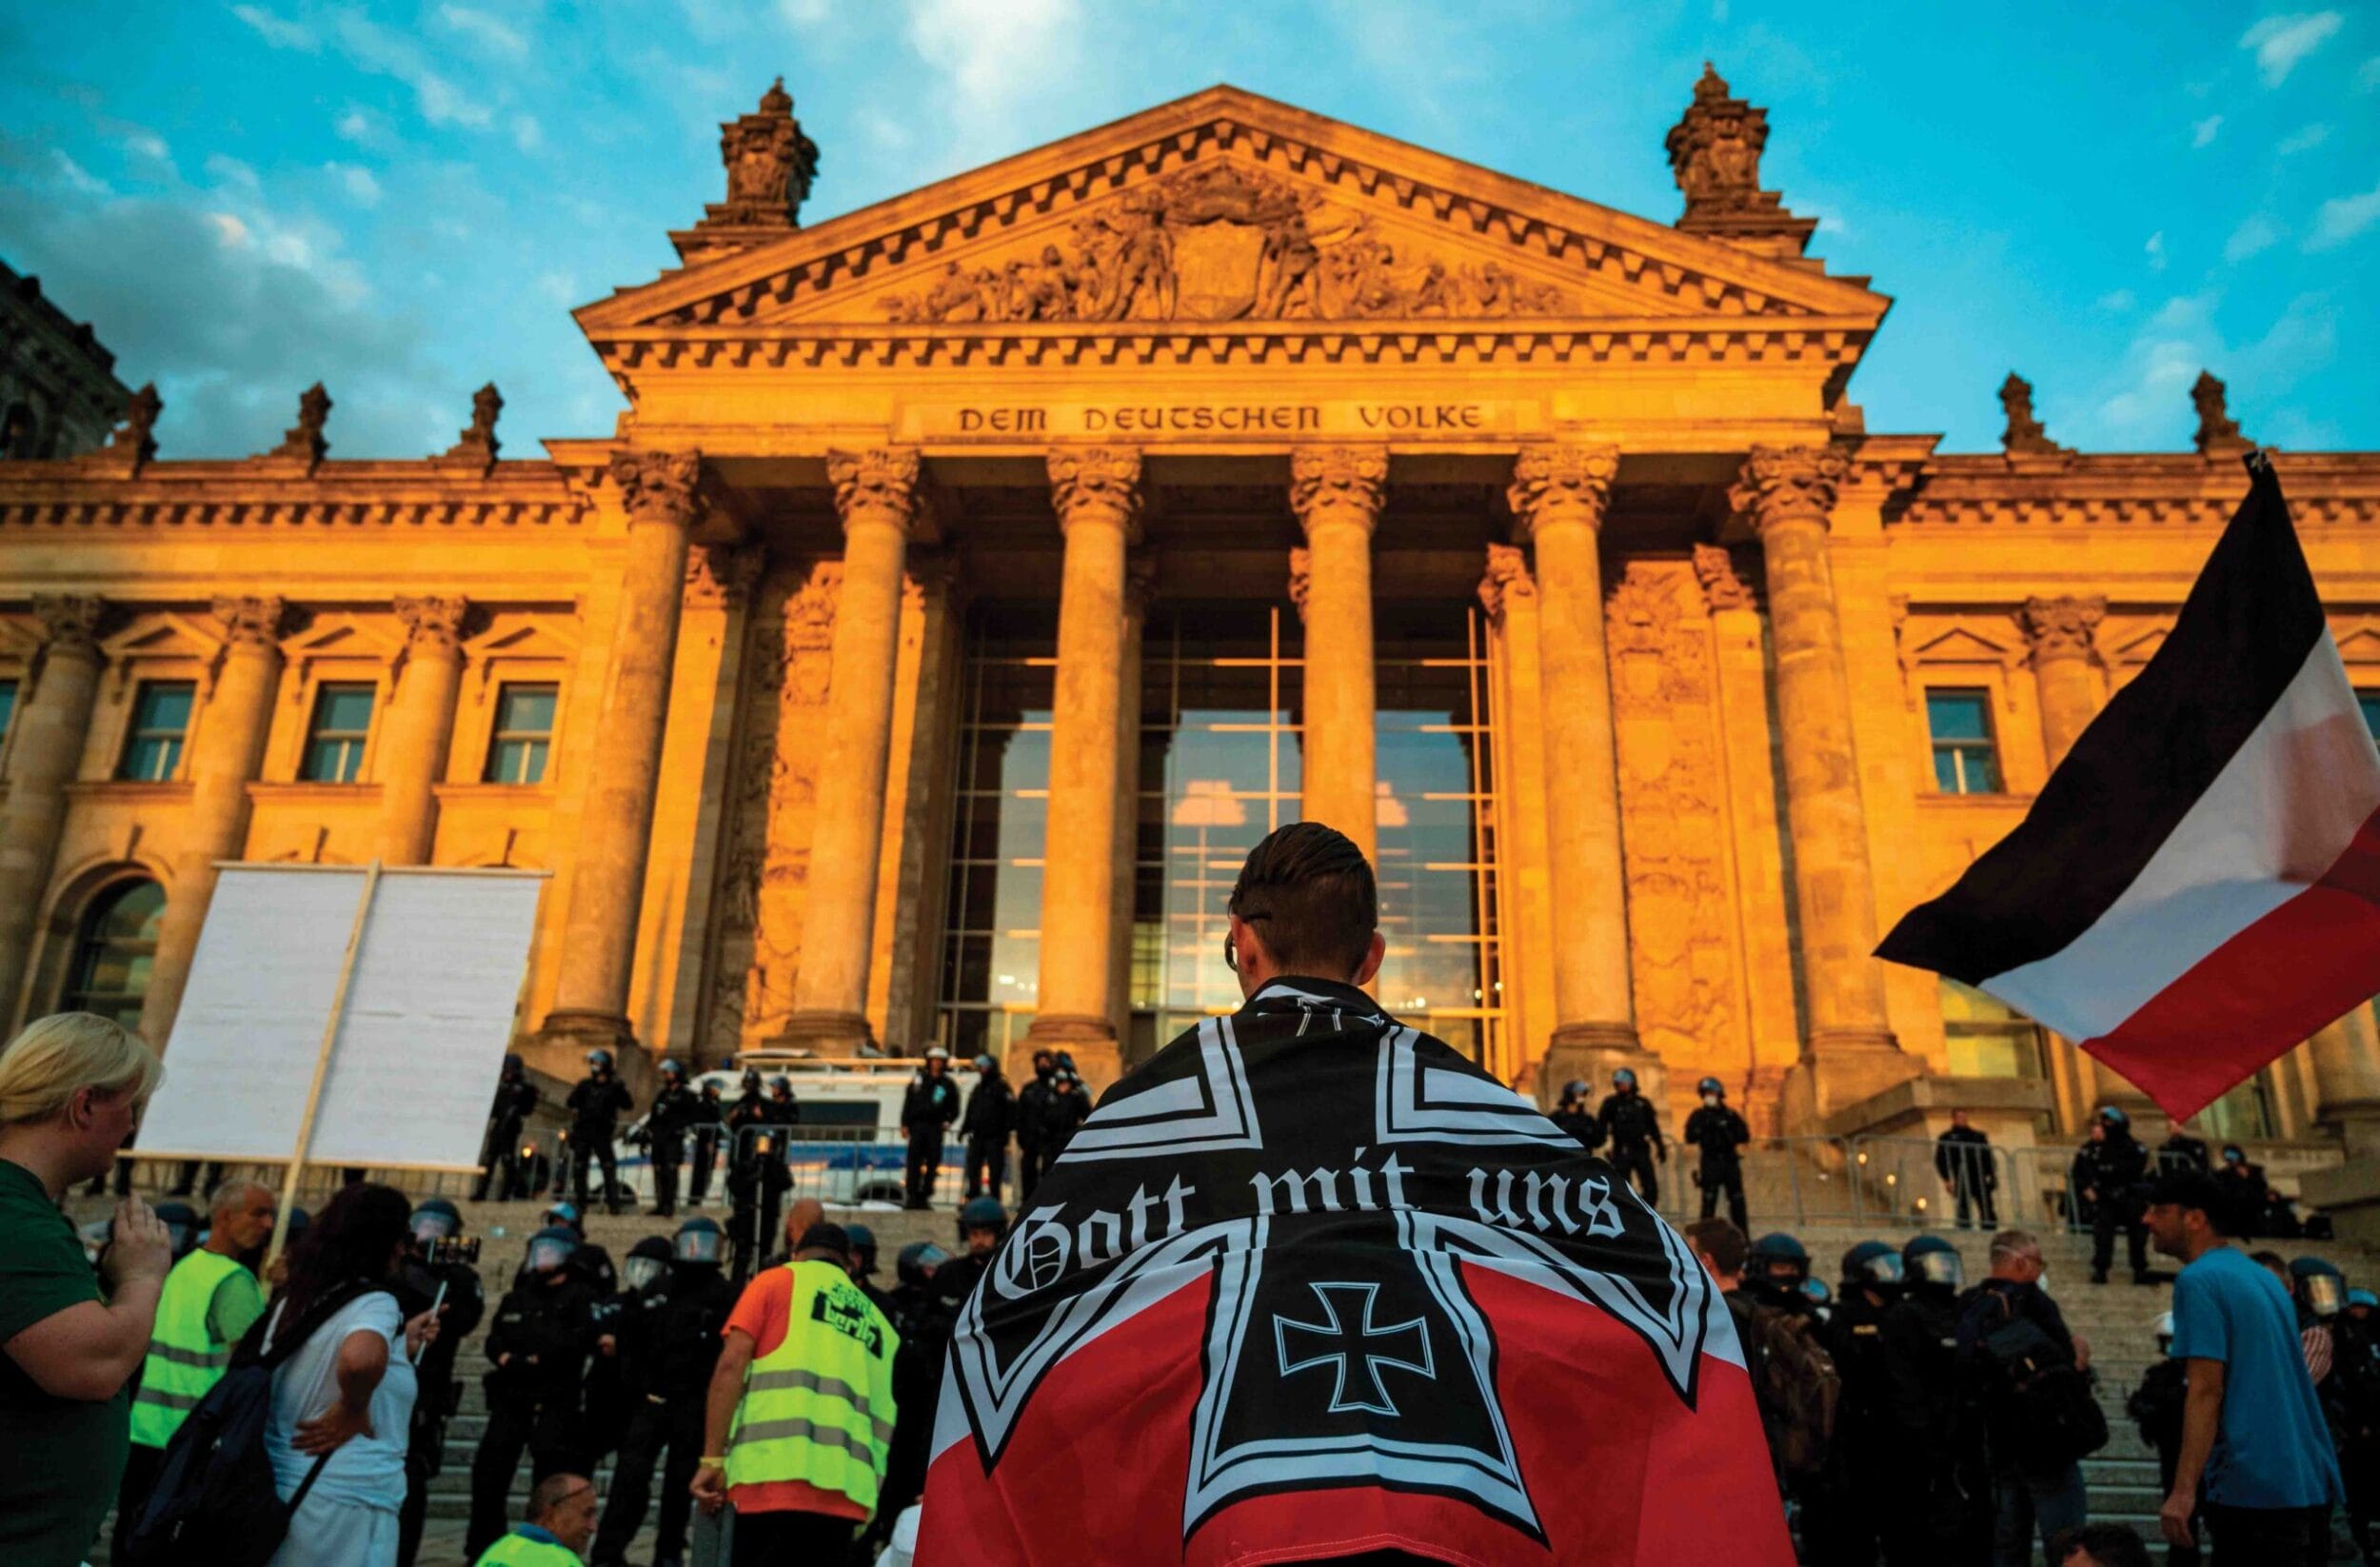 A demonstrator wrapped in a flag of the German empire in front of the Reichstag building after protesters tried to storm it at the end of a demonstration against Covid-19 restrictions, 29th August 2020